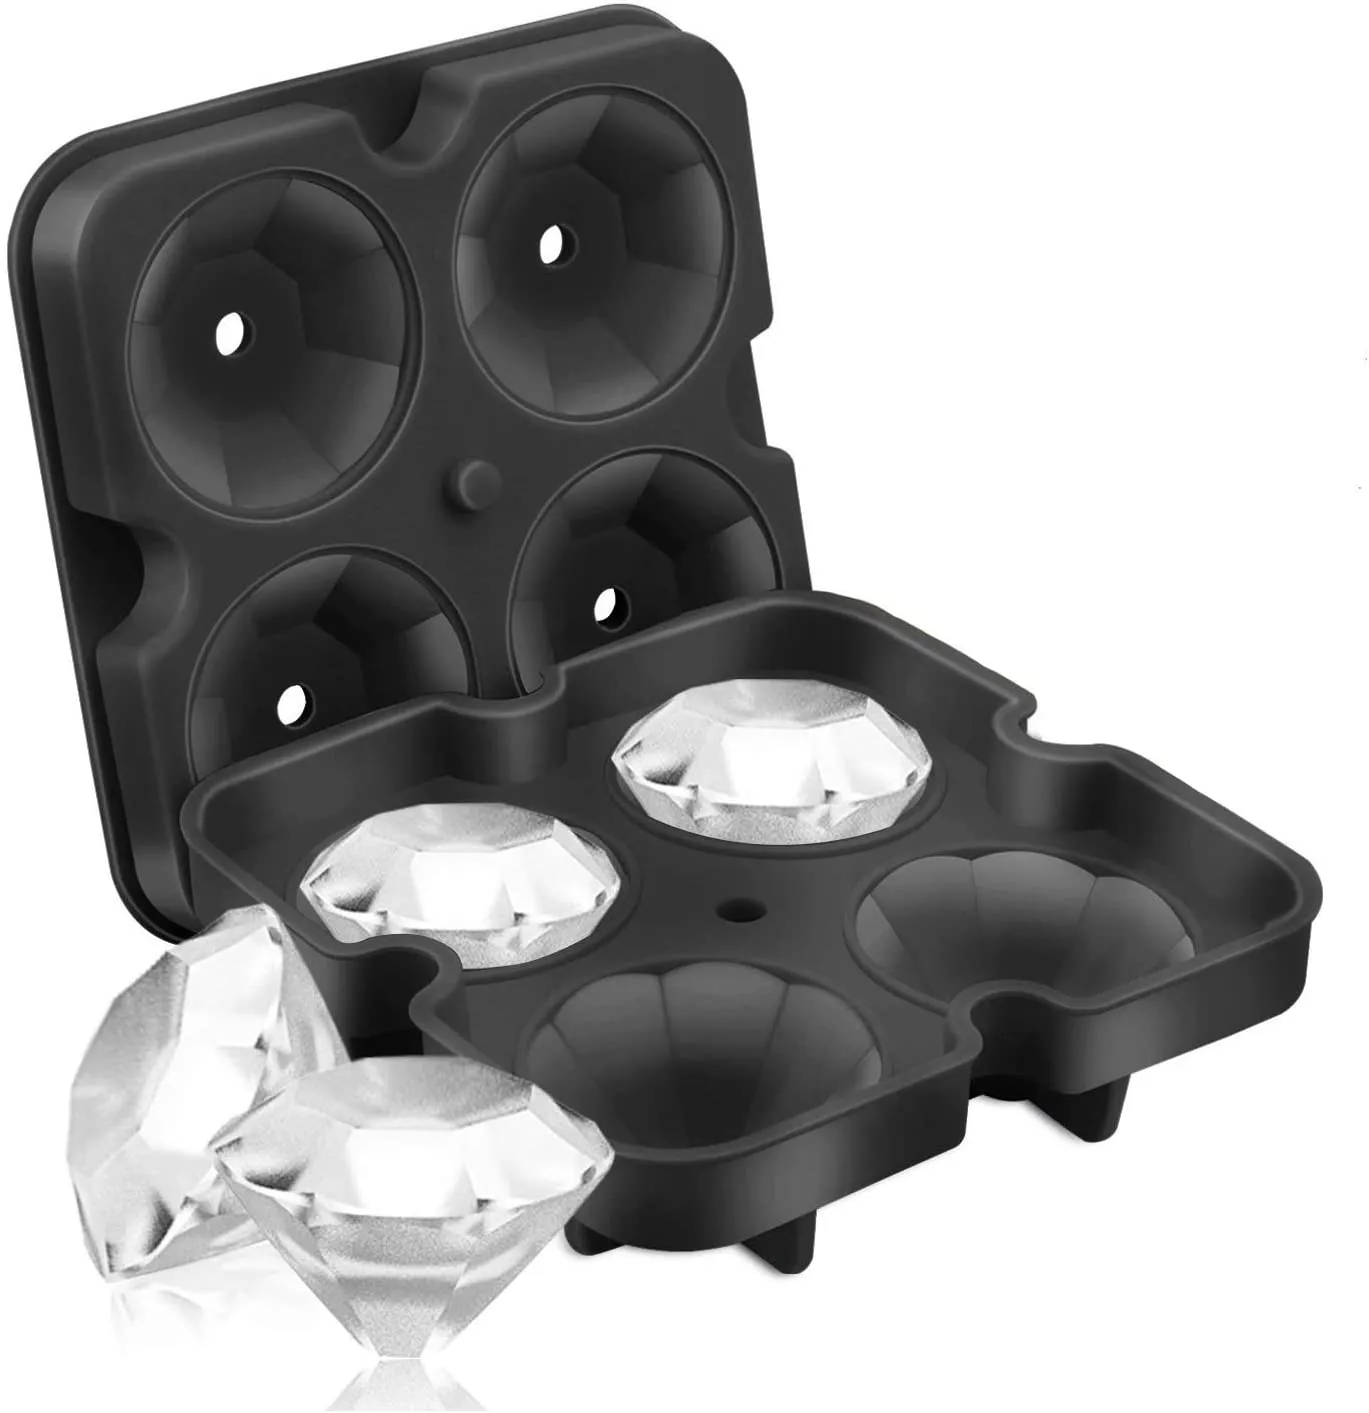 4 Cell Diamond Ice Cube Tray,Bar Tools Easy Release Silicone Mold,Candy Mould, for Whiskey,Cocktails and Juice Beverages,Black